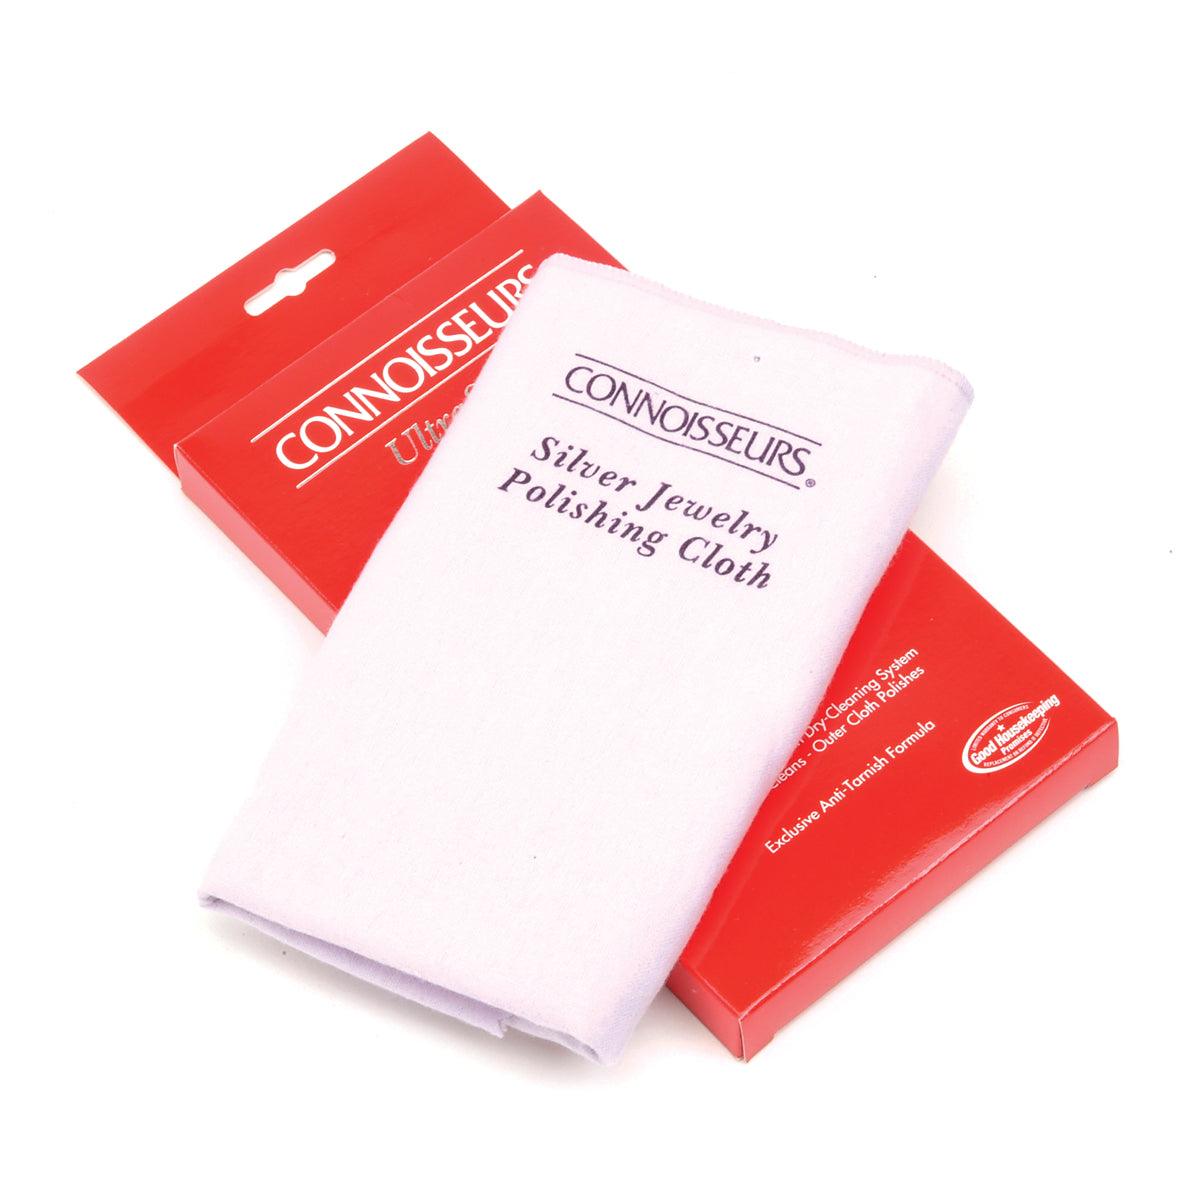 Connoisseurs Silver Jewelry Polishing Cloth Cleans and Polishes All Silver  Jewelry 